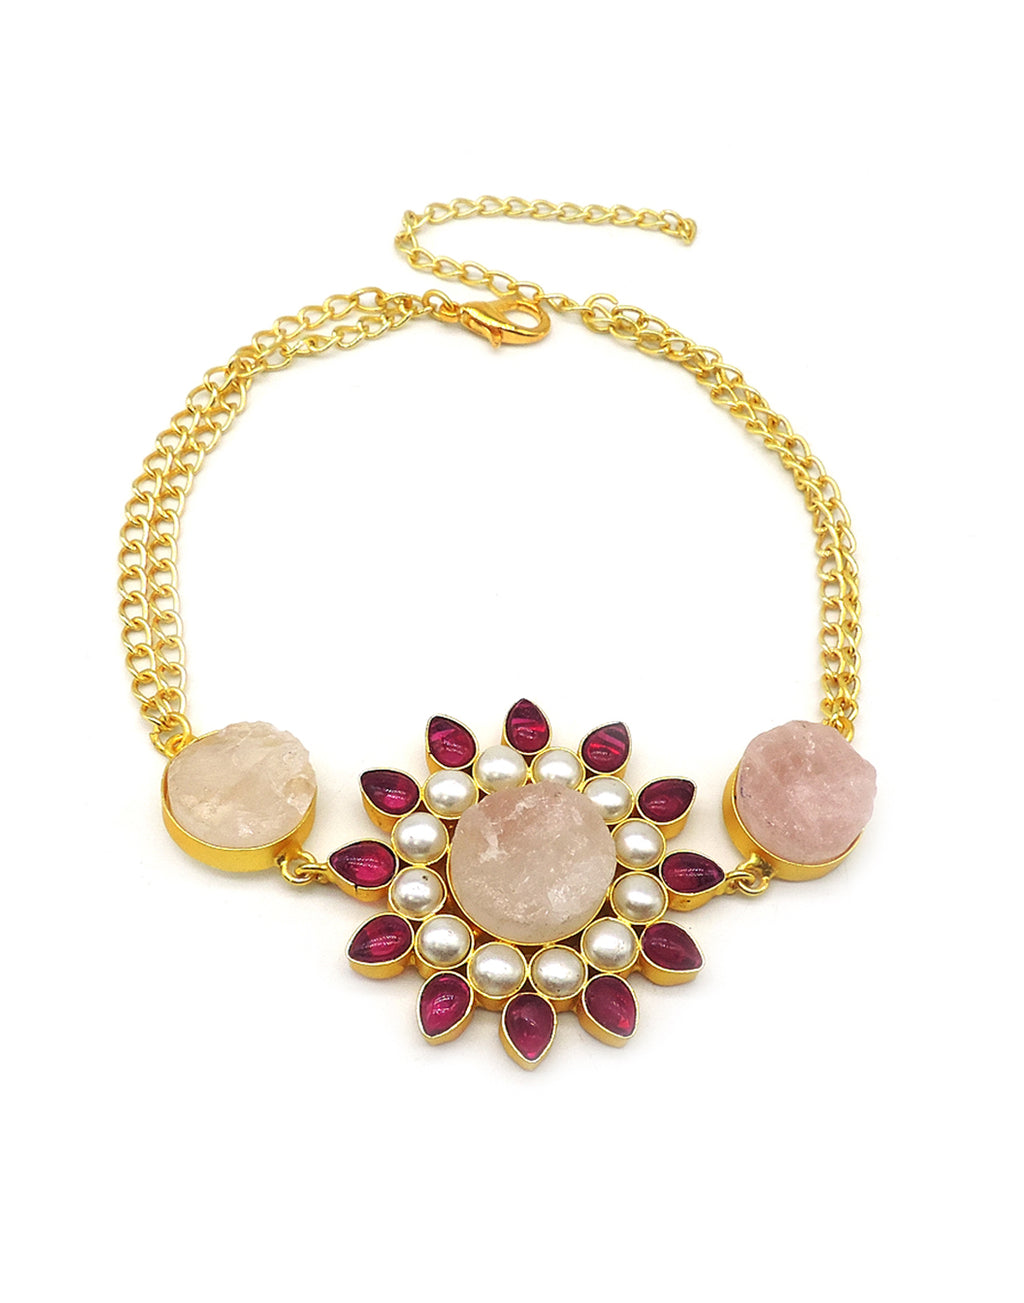 Pink Sunflower Necklace - Statement Necklaces - Gold-Plated & Hypoallergenic Jewellery - Made in India - Dubai Jewellery - Dori